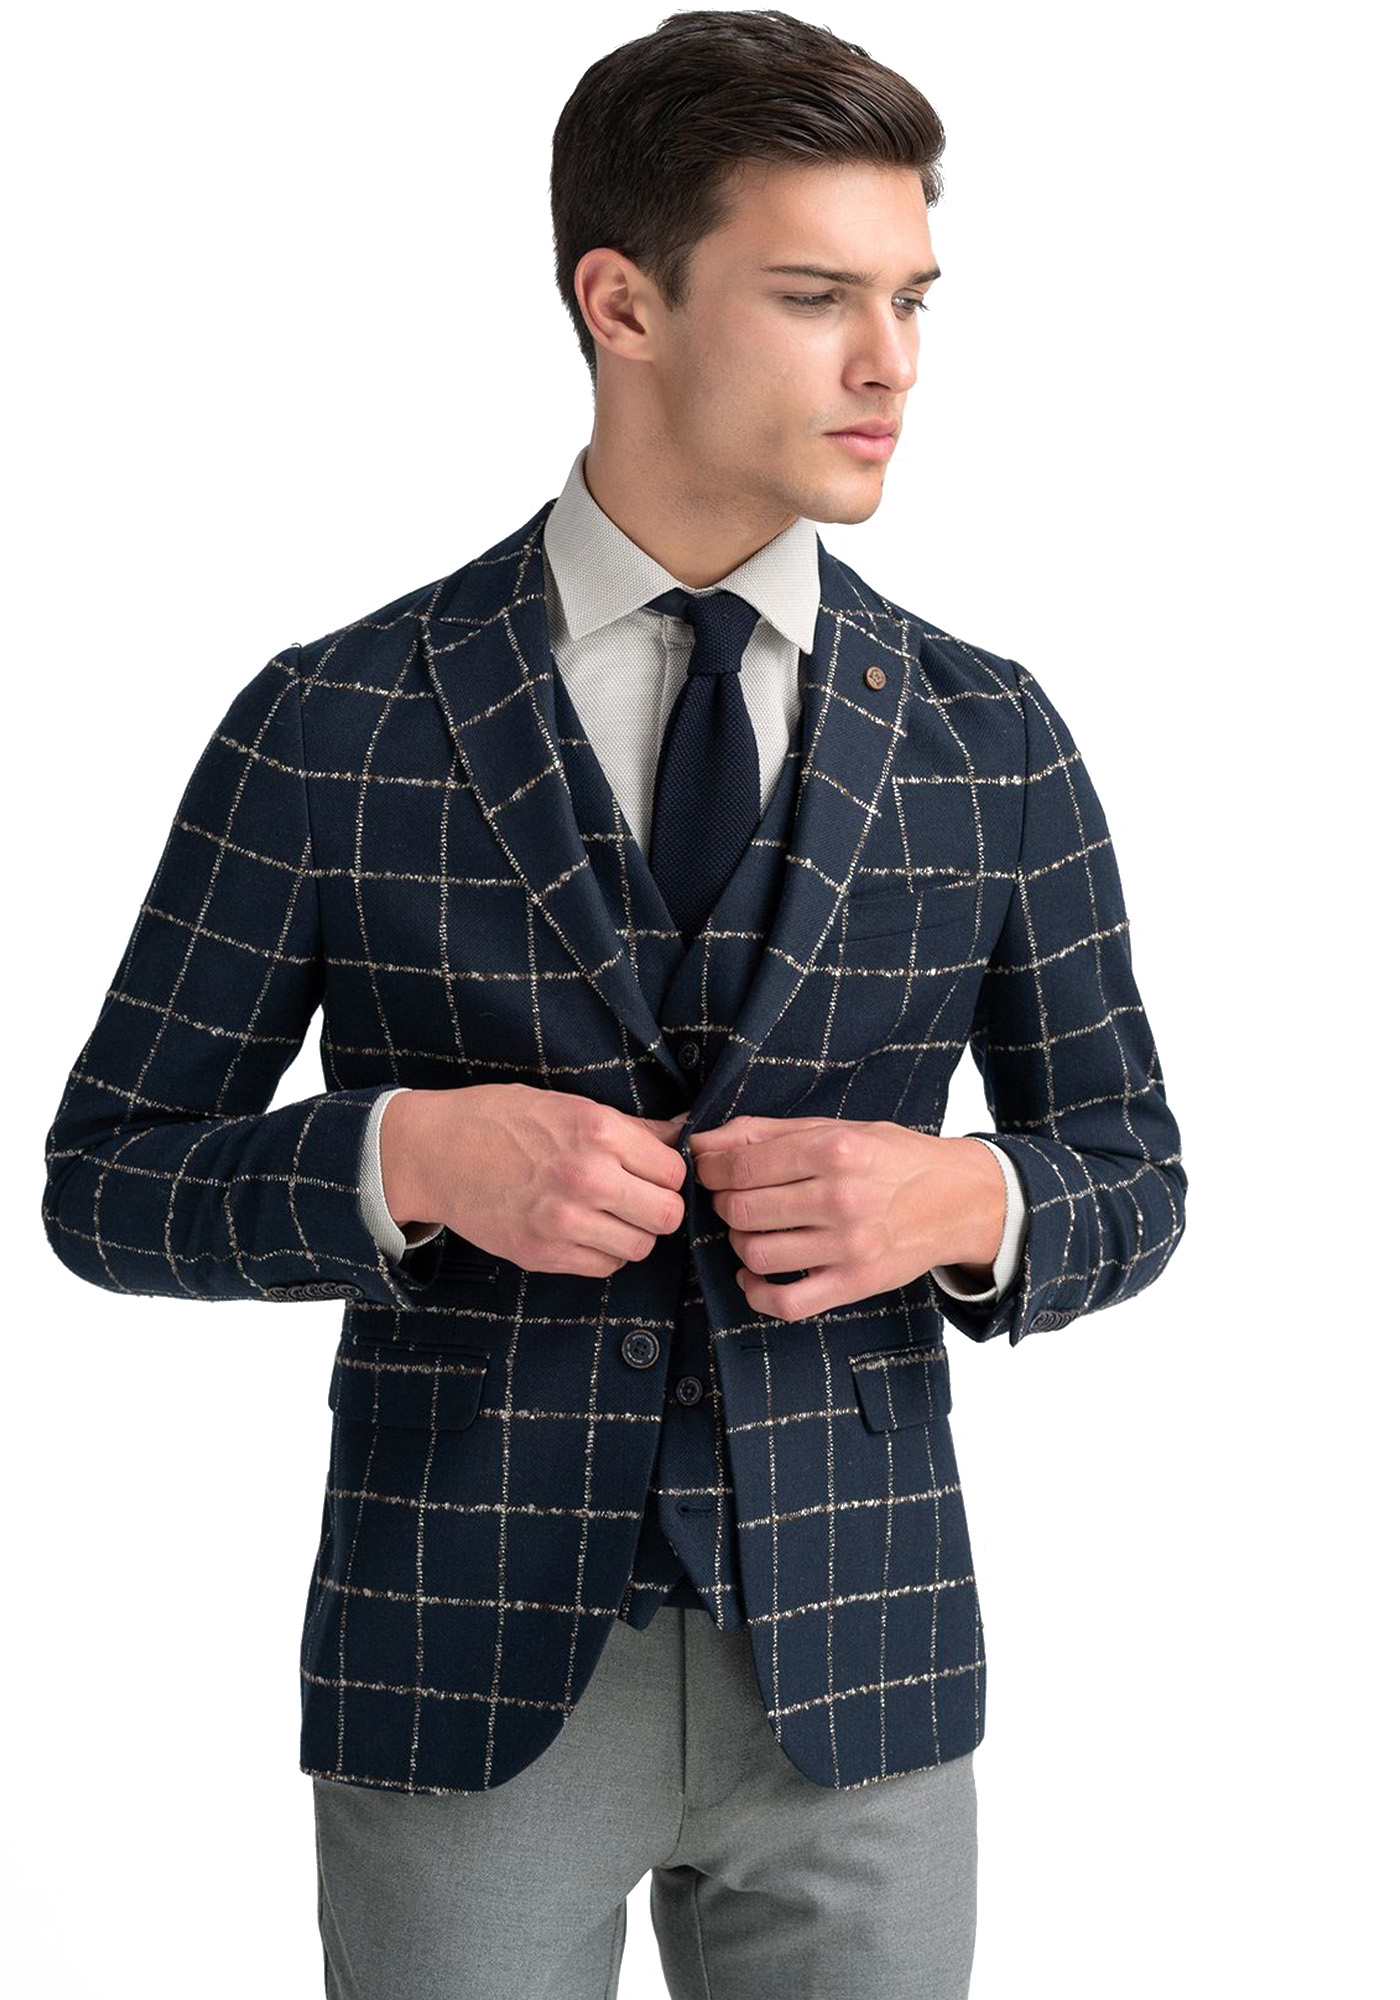 Monte Napoleone Σακάκι της σειράς Interfit - 202 71 7270 7307 005 Navy Check